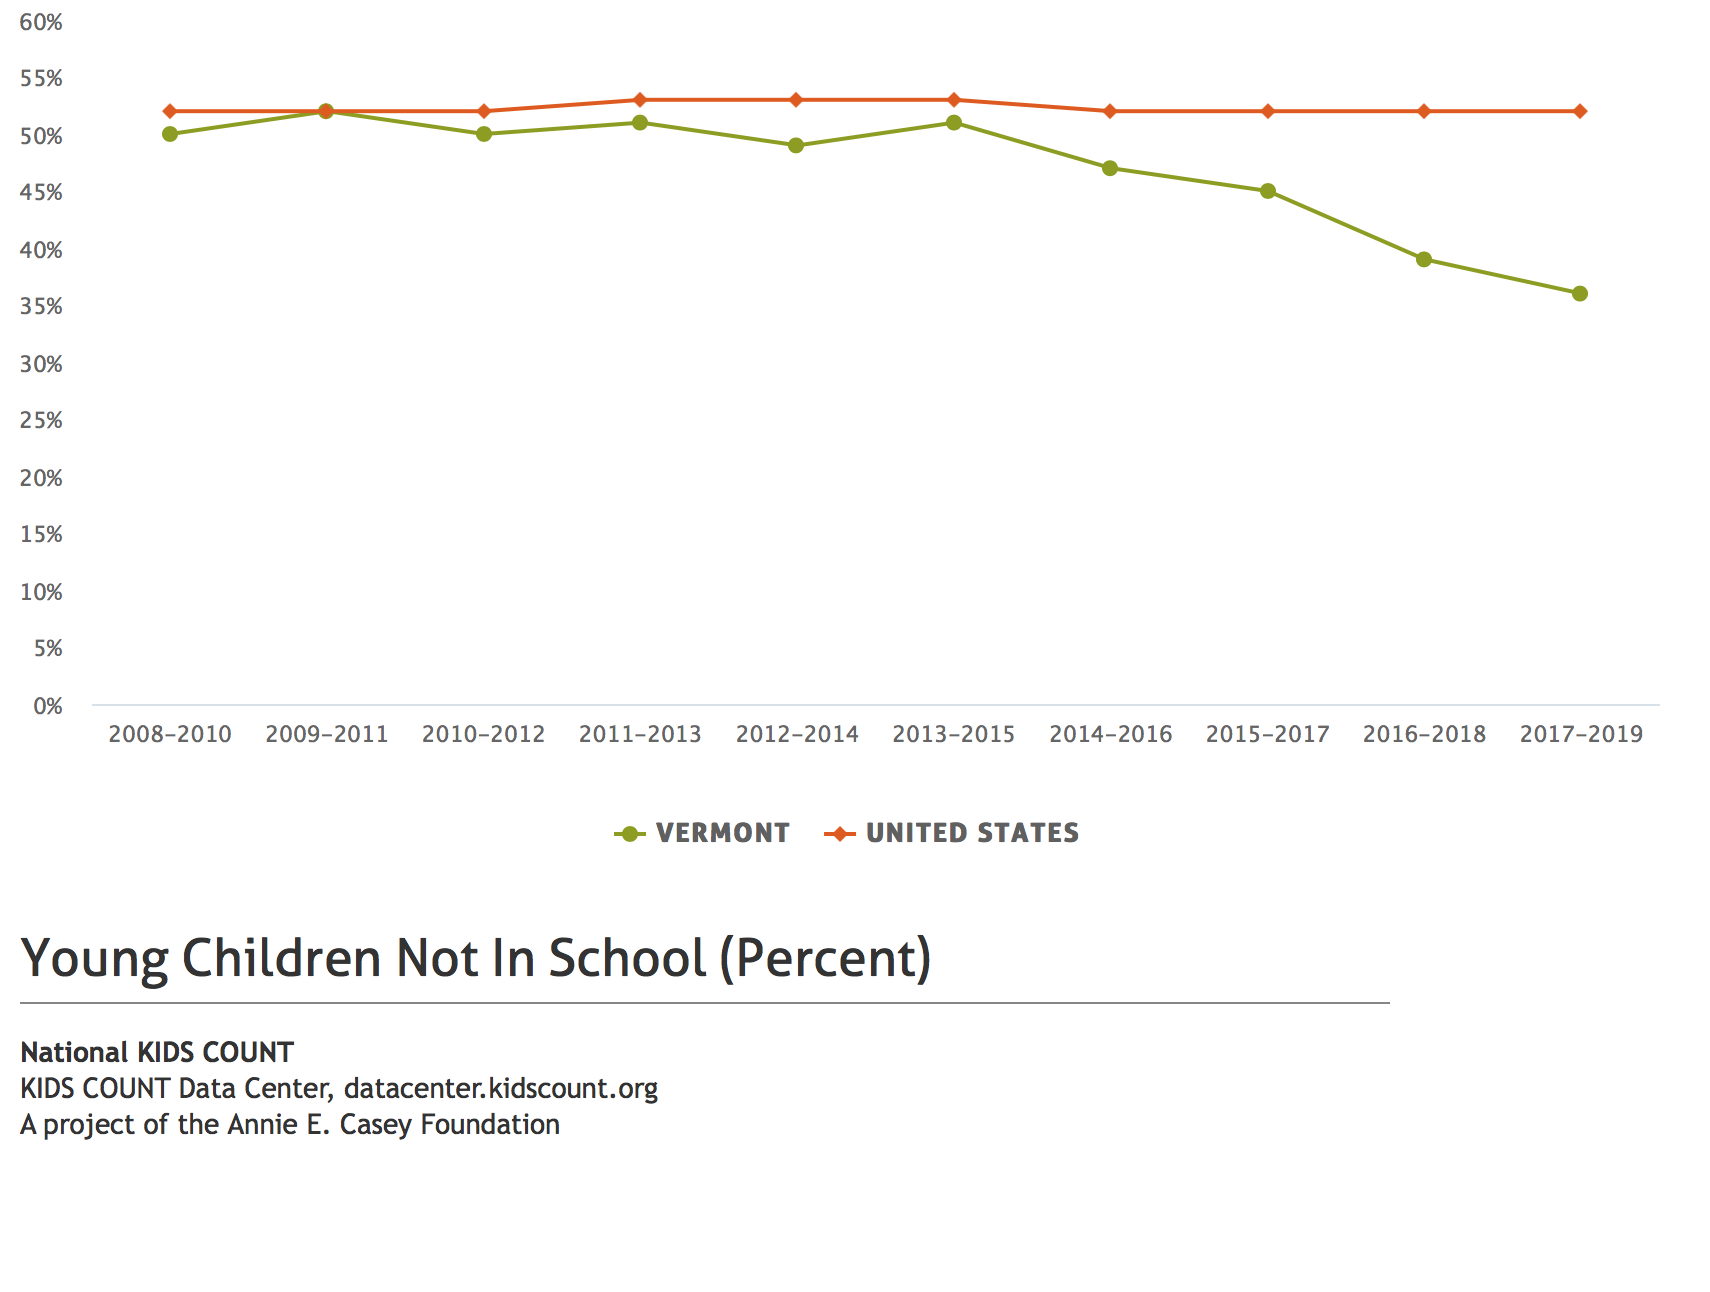 Young children (ages 3 and 4) not in school